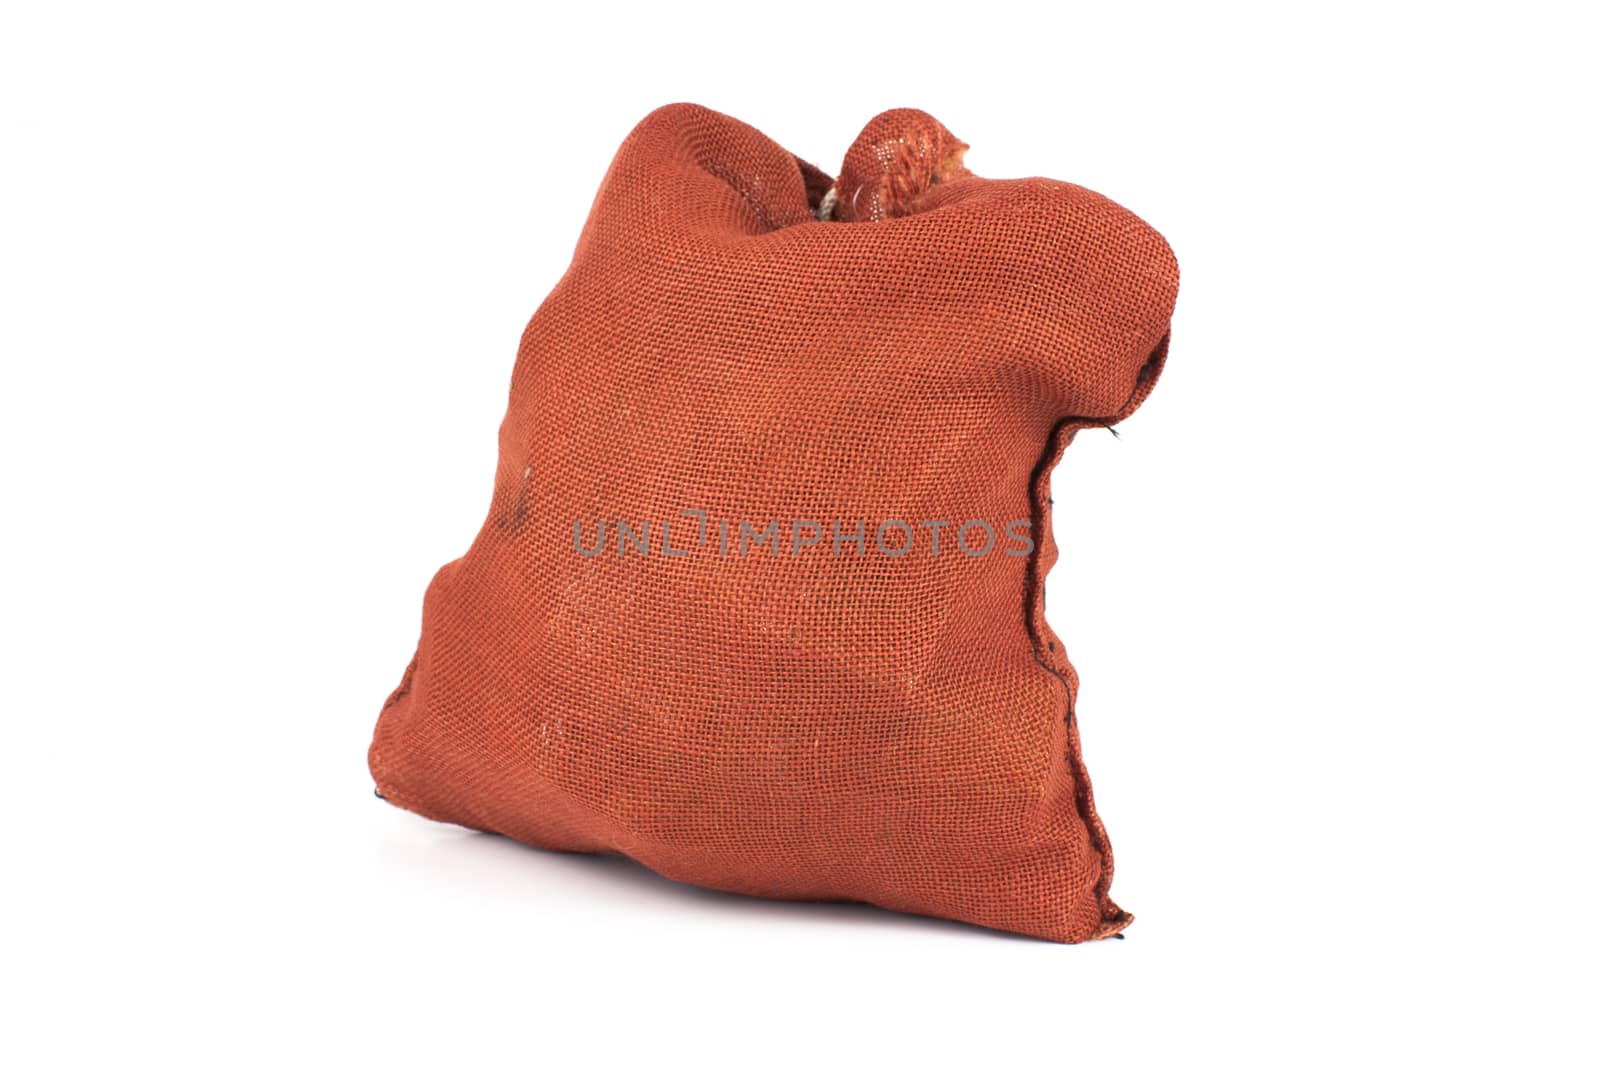 Red sack set against a white background